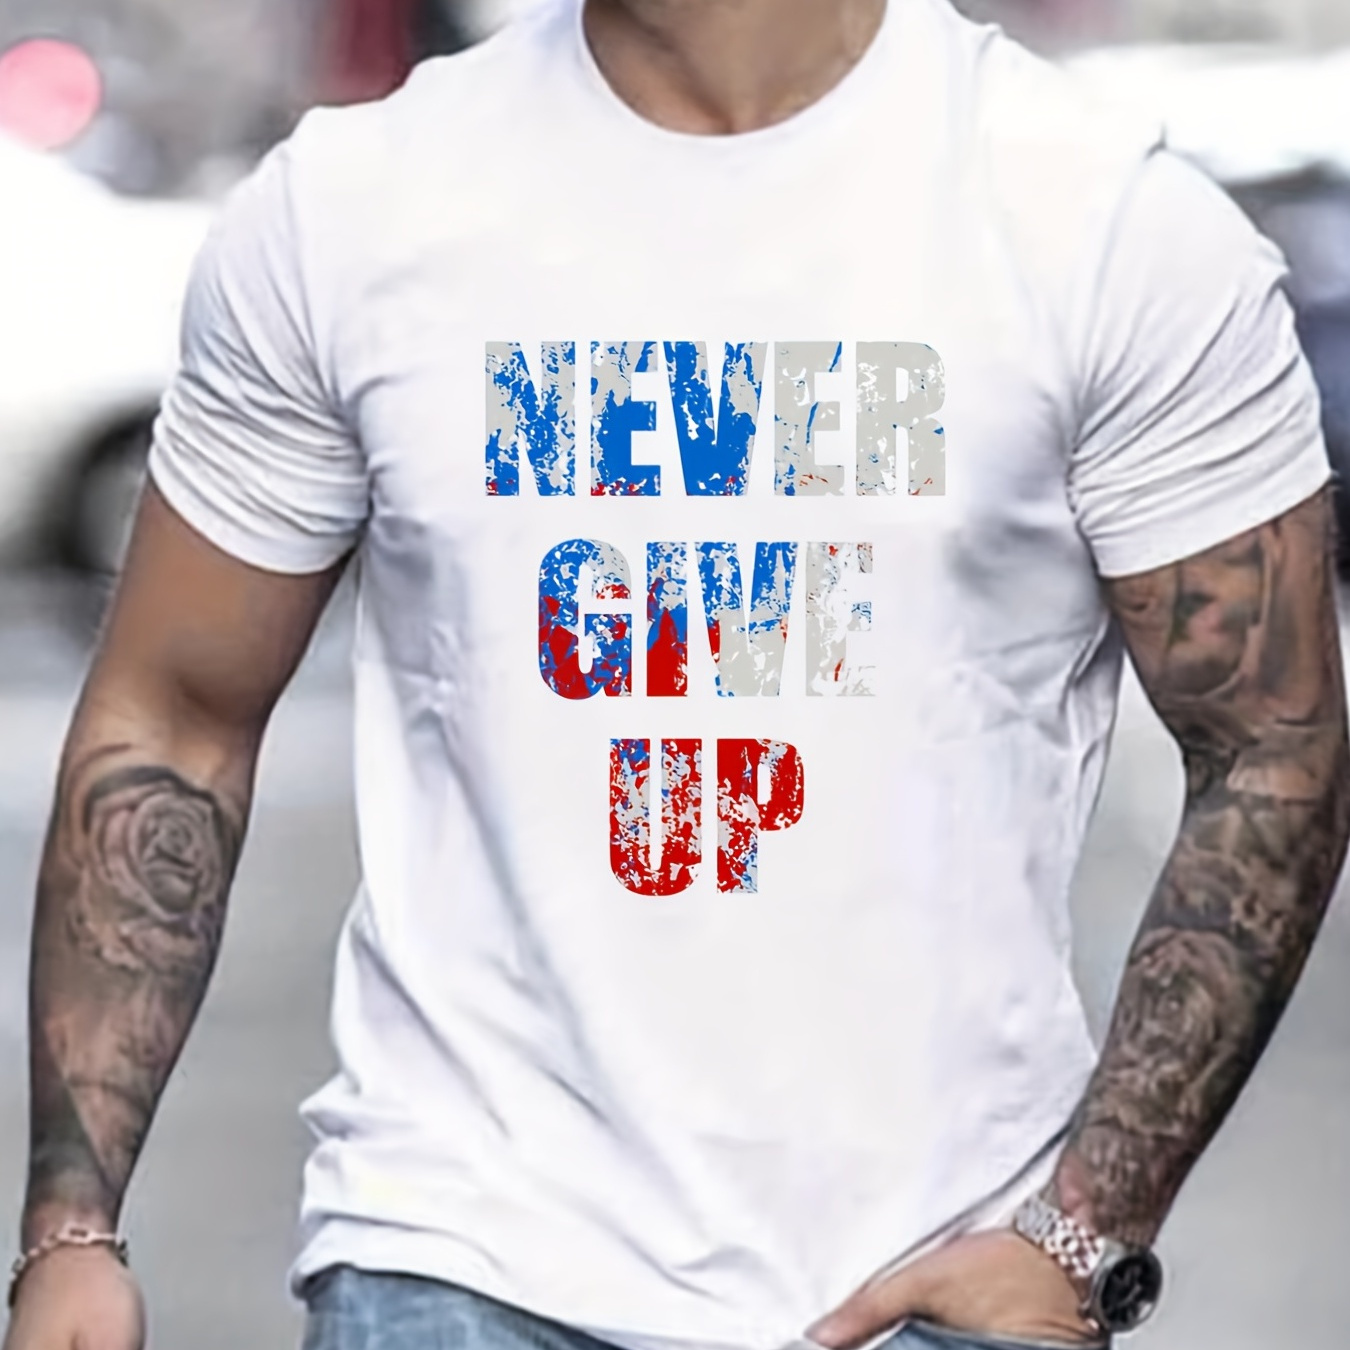 

Never Give Up Print Men's Casual Short Sleeve Crew Neck T-shirt, Summer Outdoor